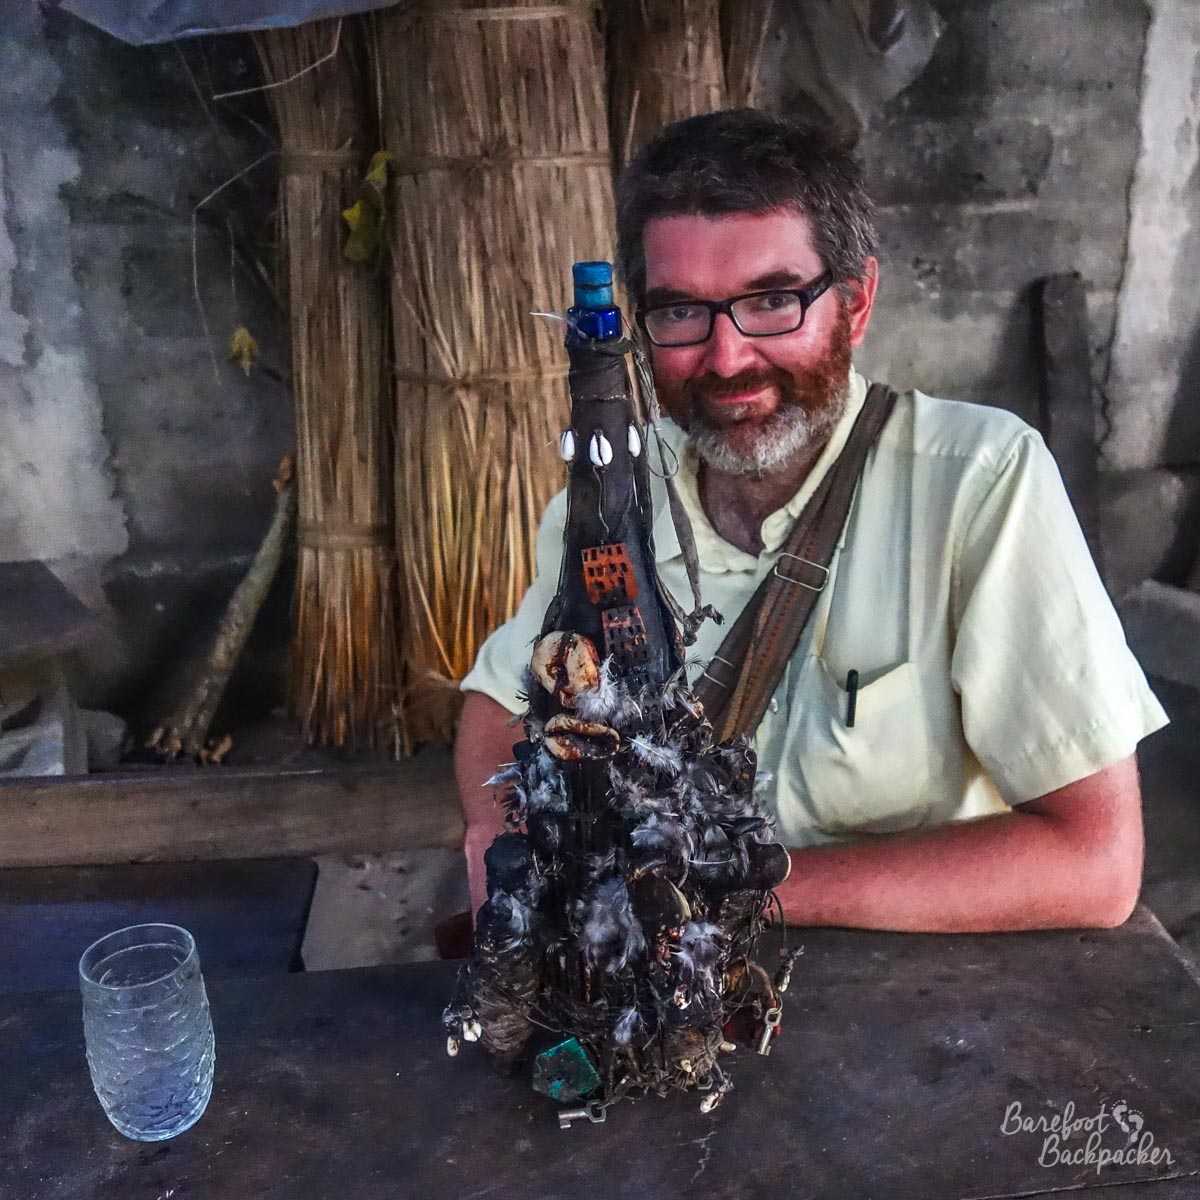 The Barefoot Backpacker is sat behind a table. On the table is a very ornately decorated bottle, with feathers, attachments, string, lots of stuff. What is in the bottle is something known only to the Vodun priest. But you can bet your life it won't be lemonade.